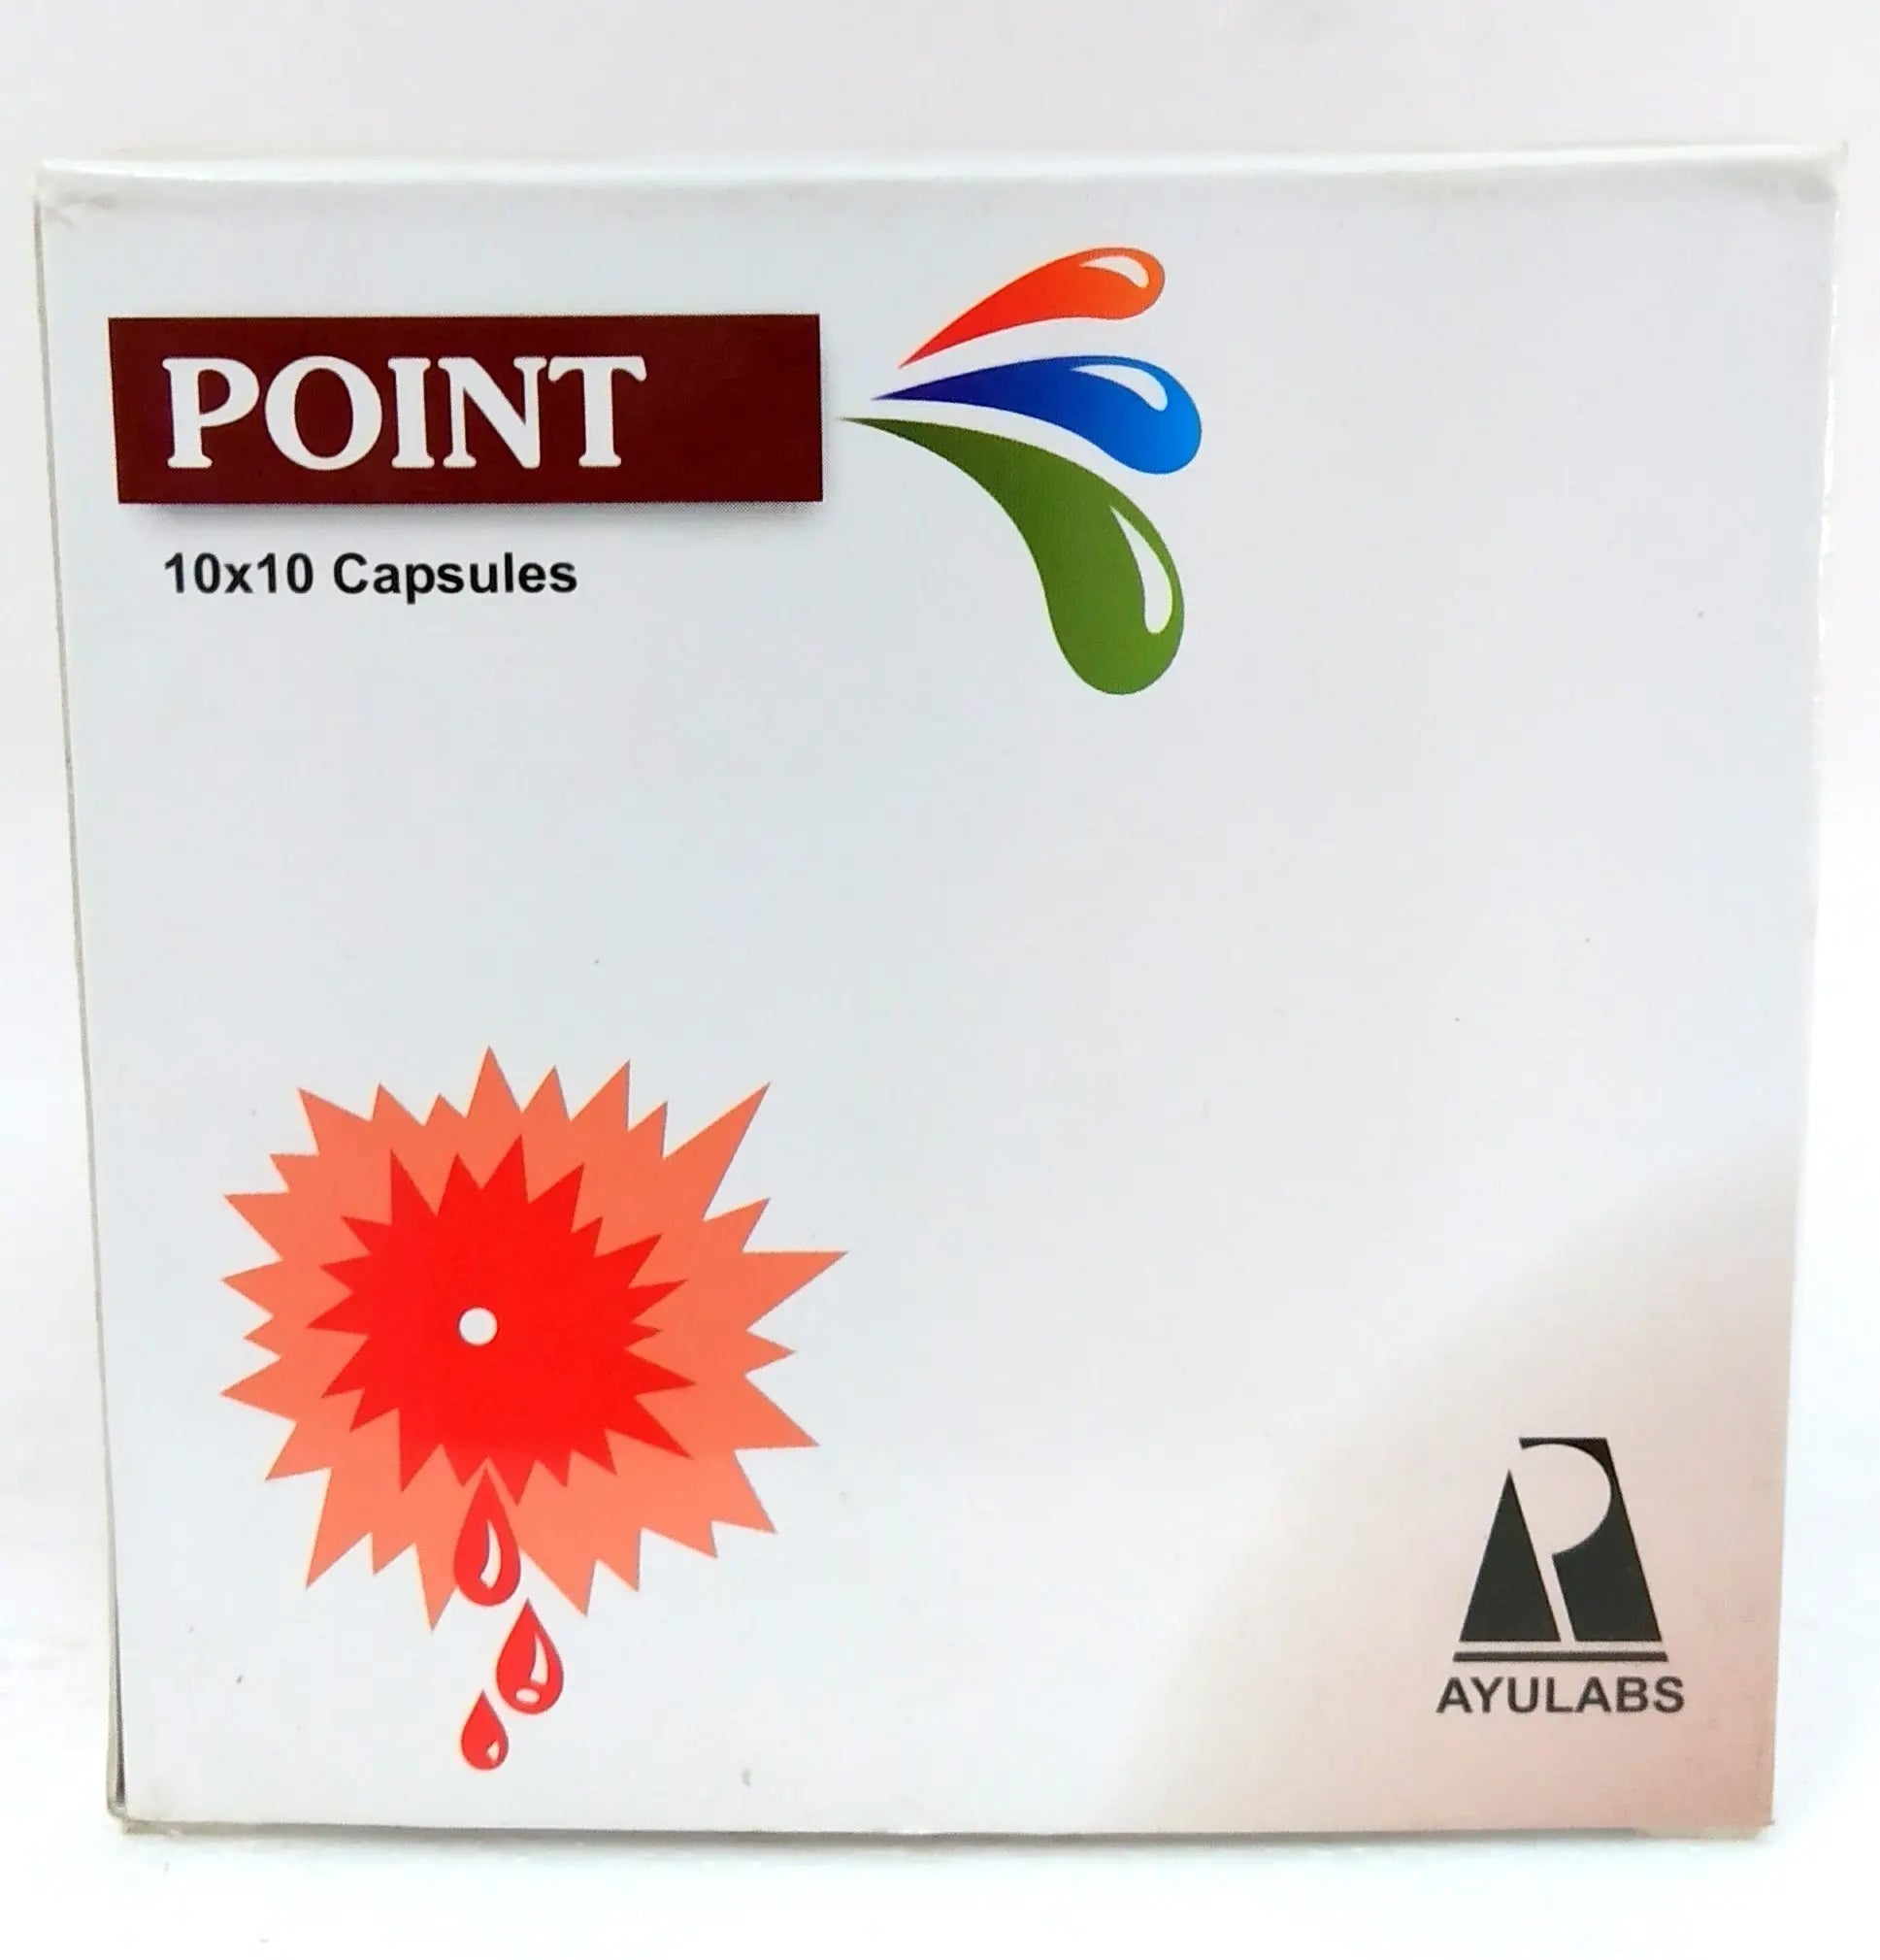 Point 10Capsules Ayulabs